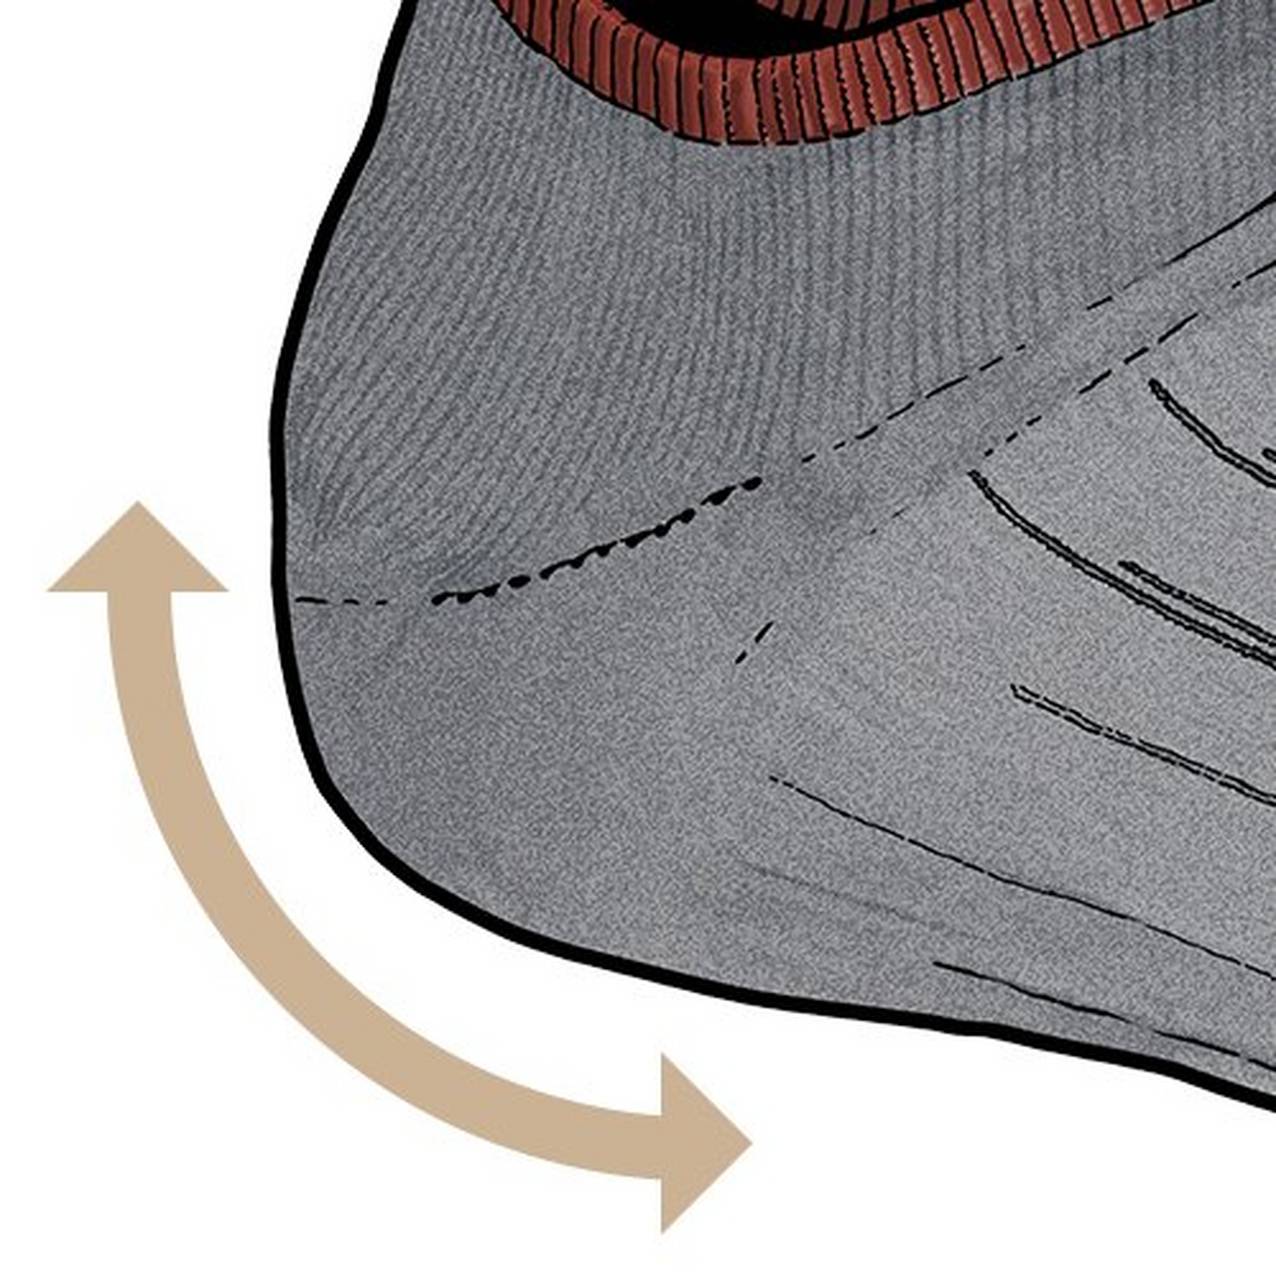 Close up of an illustration sock heel with an arrow showing the curve of the heel